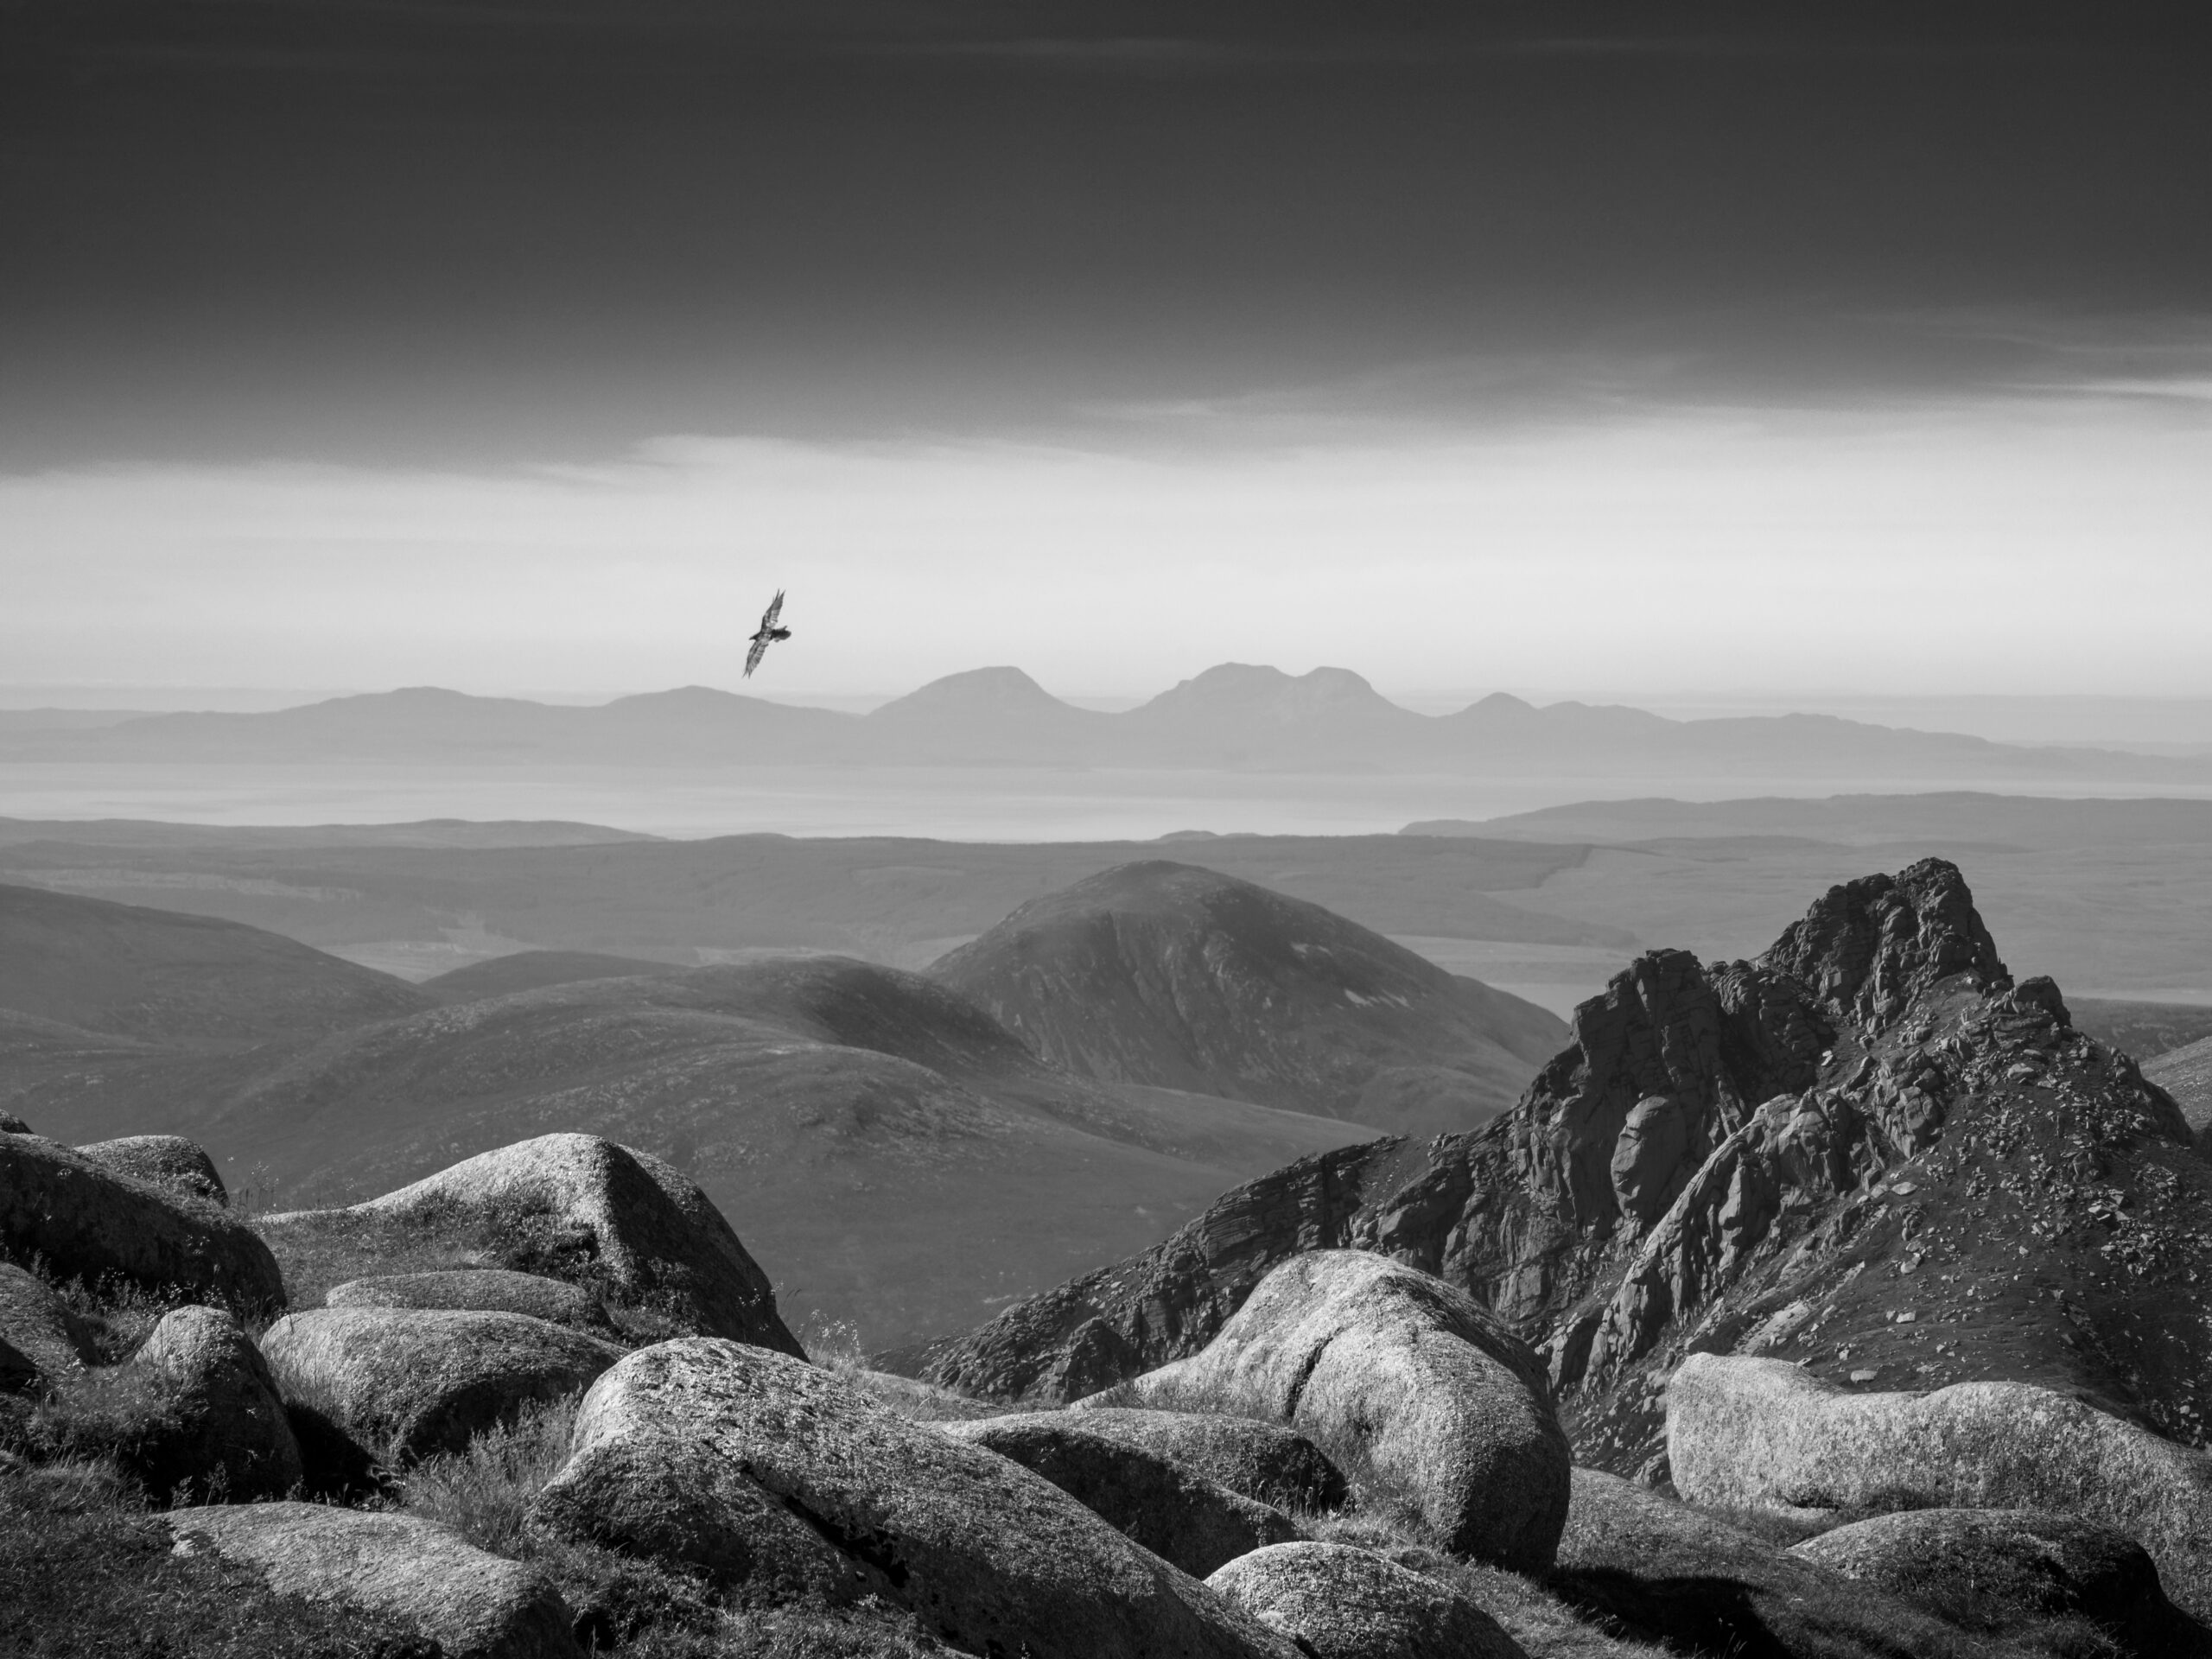 a raven soars over a black and white misty landscape with mountains in the distance and boulders up close